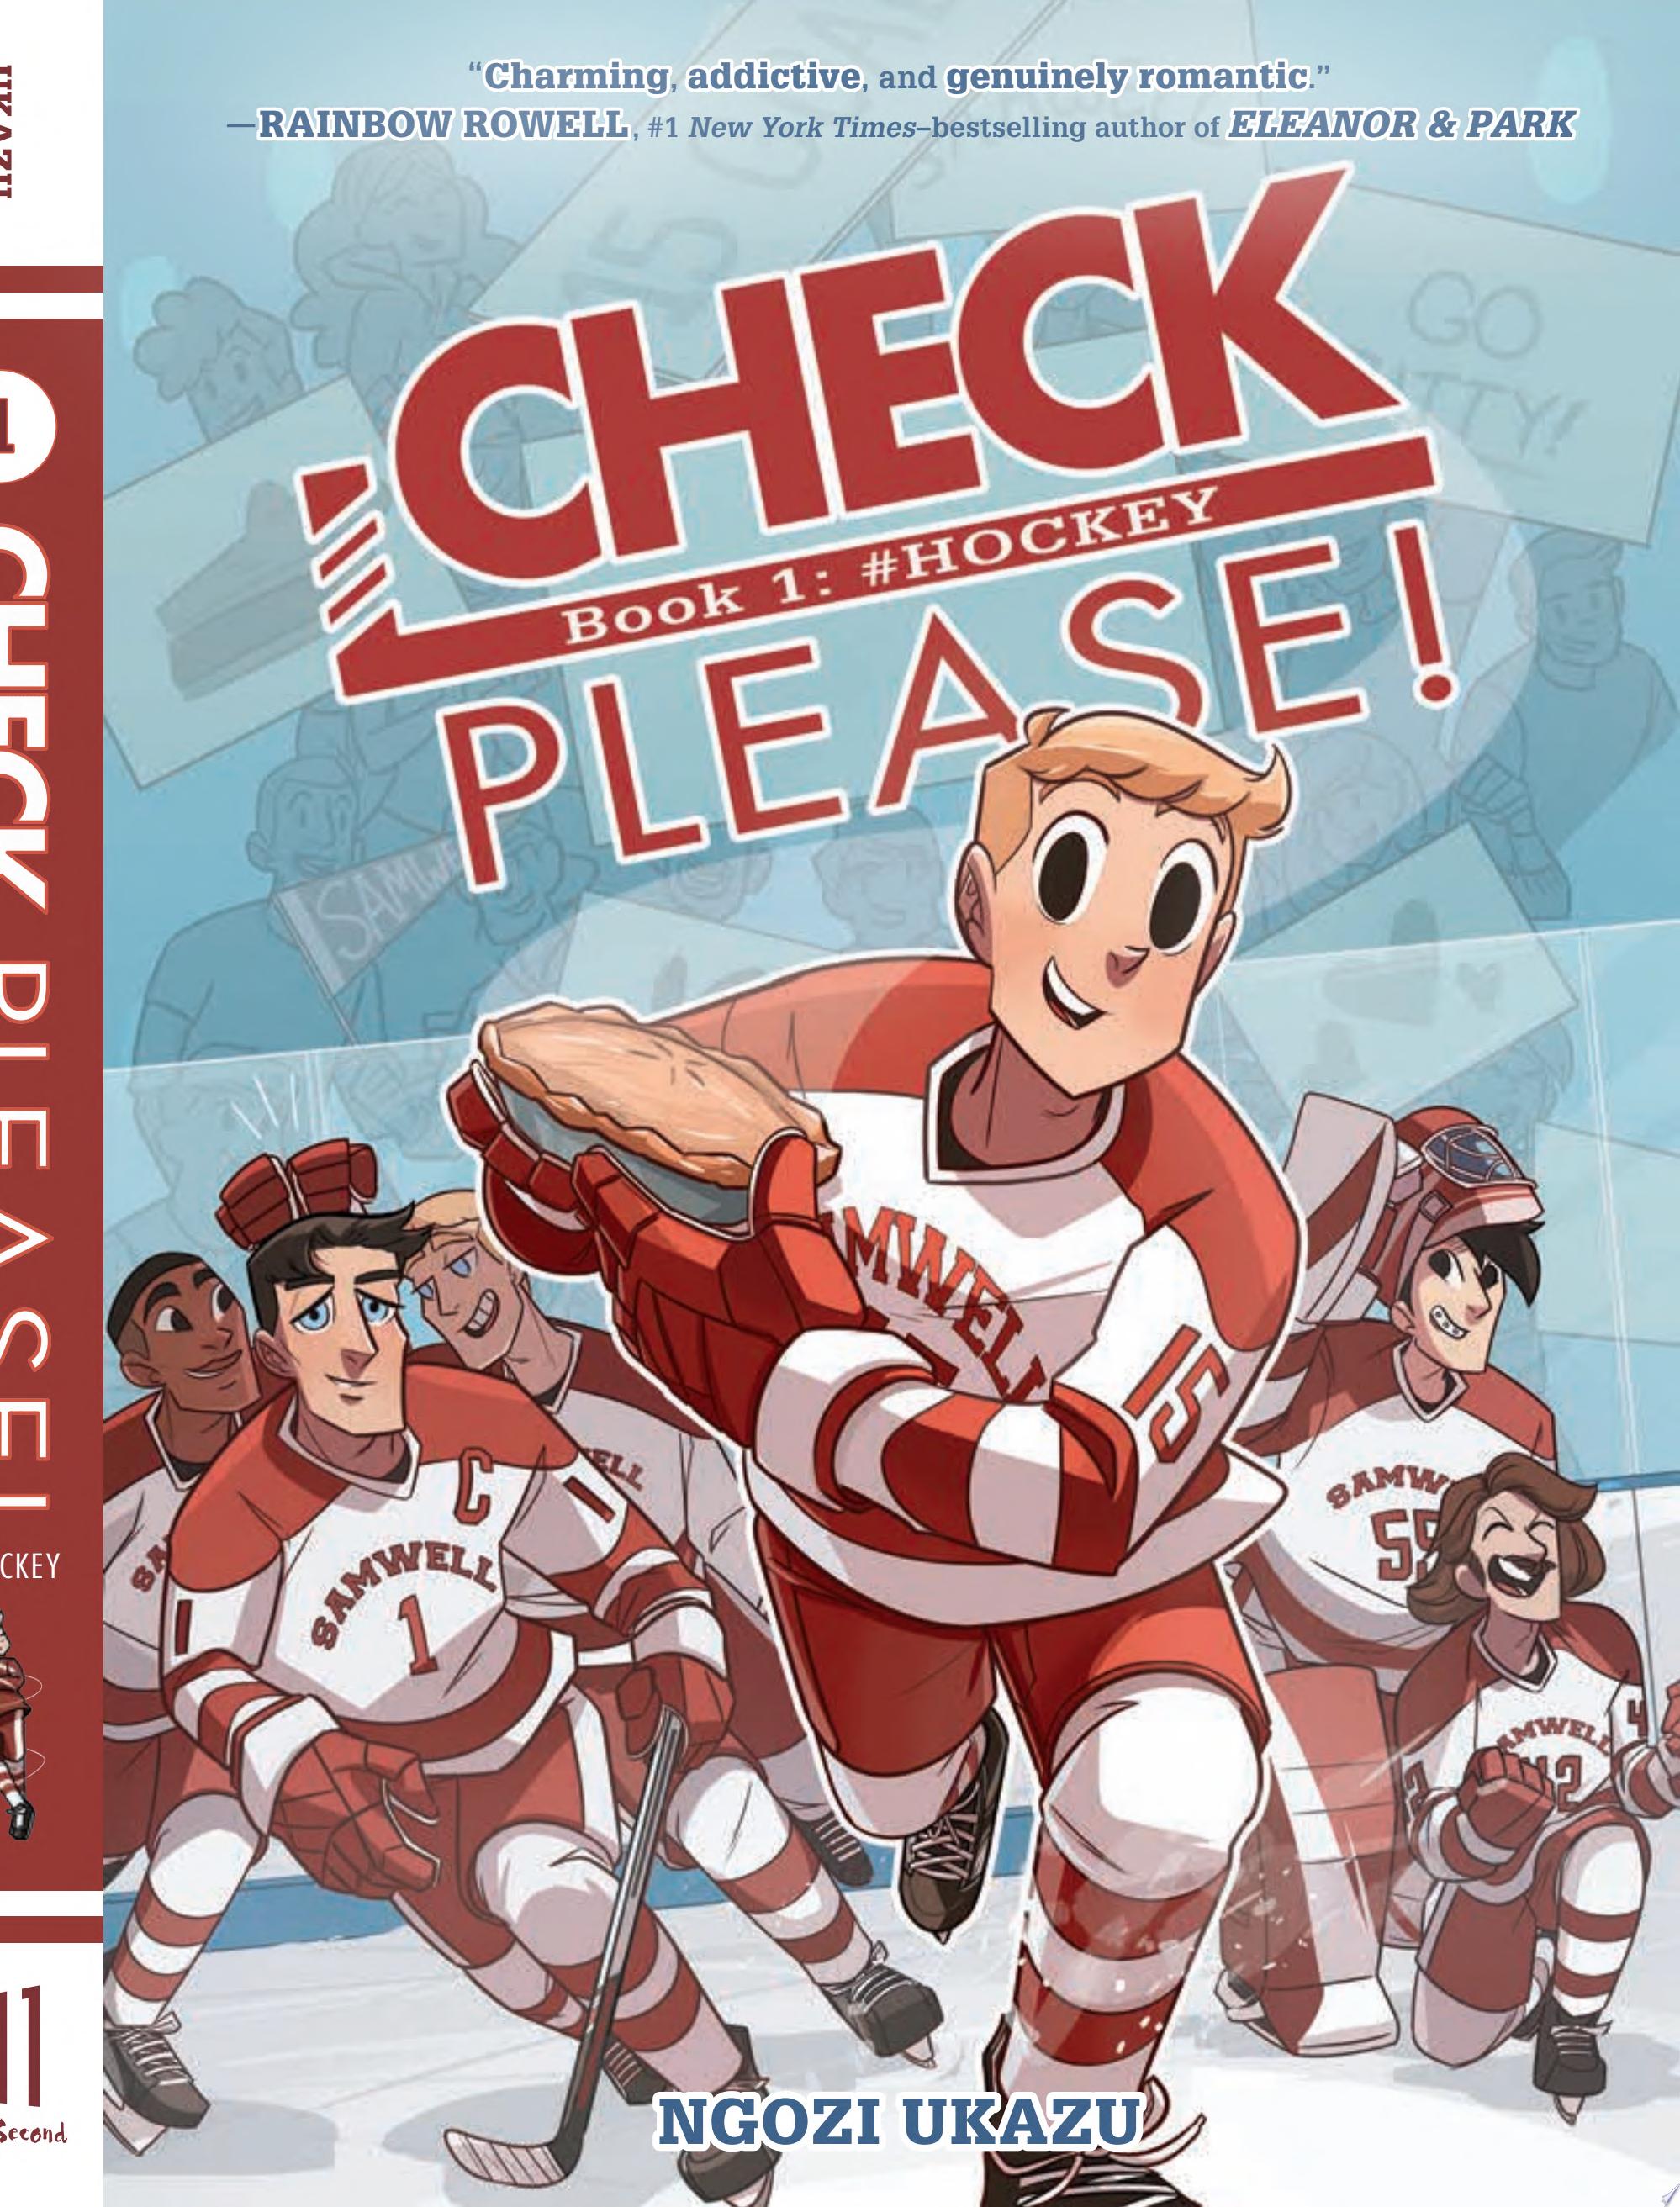 Image for "Check, Please! Book 1: #Hockey"